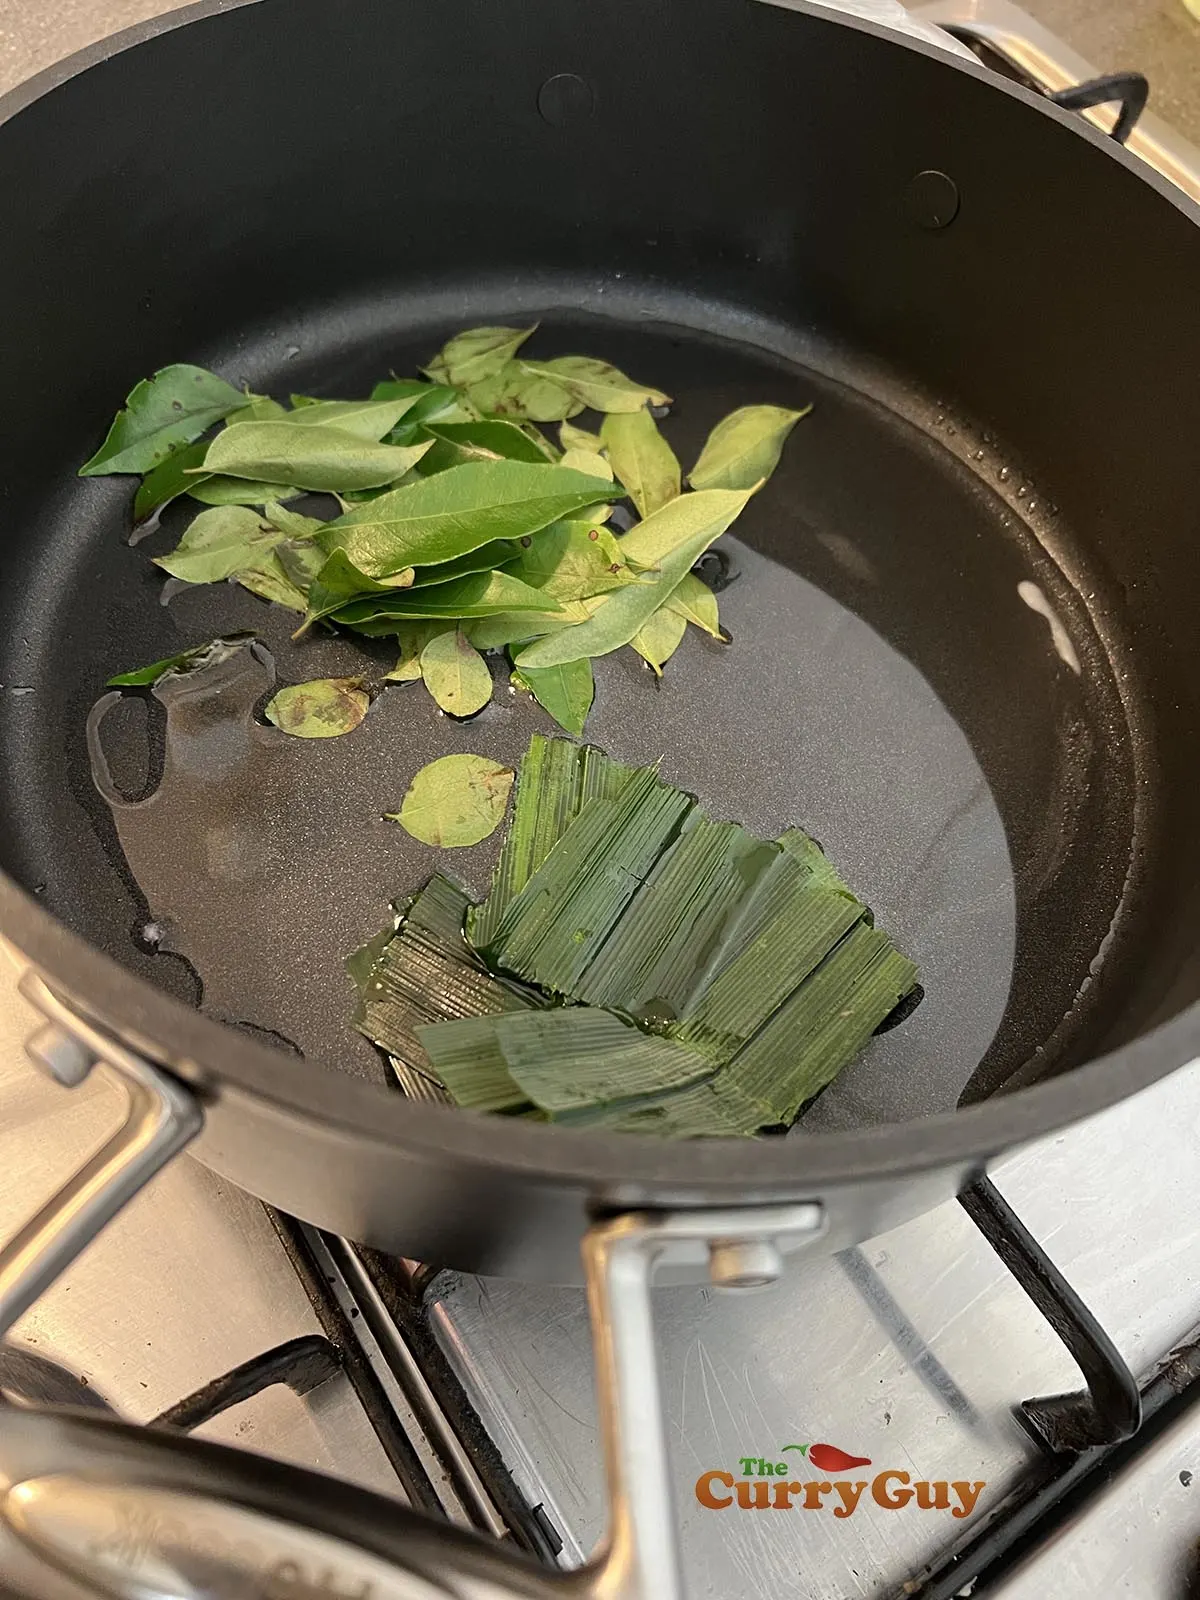 Infusing curry leaves and pandan leaves into oil